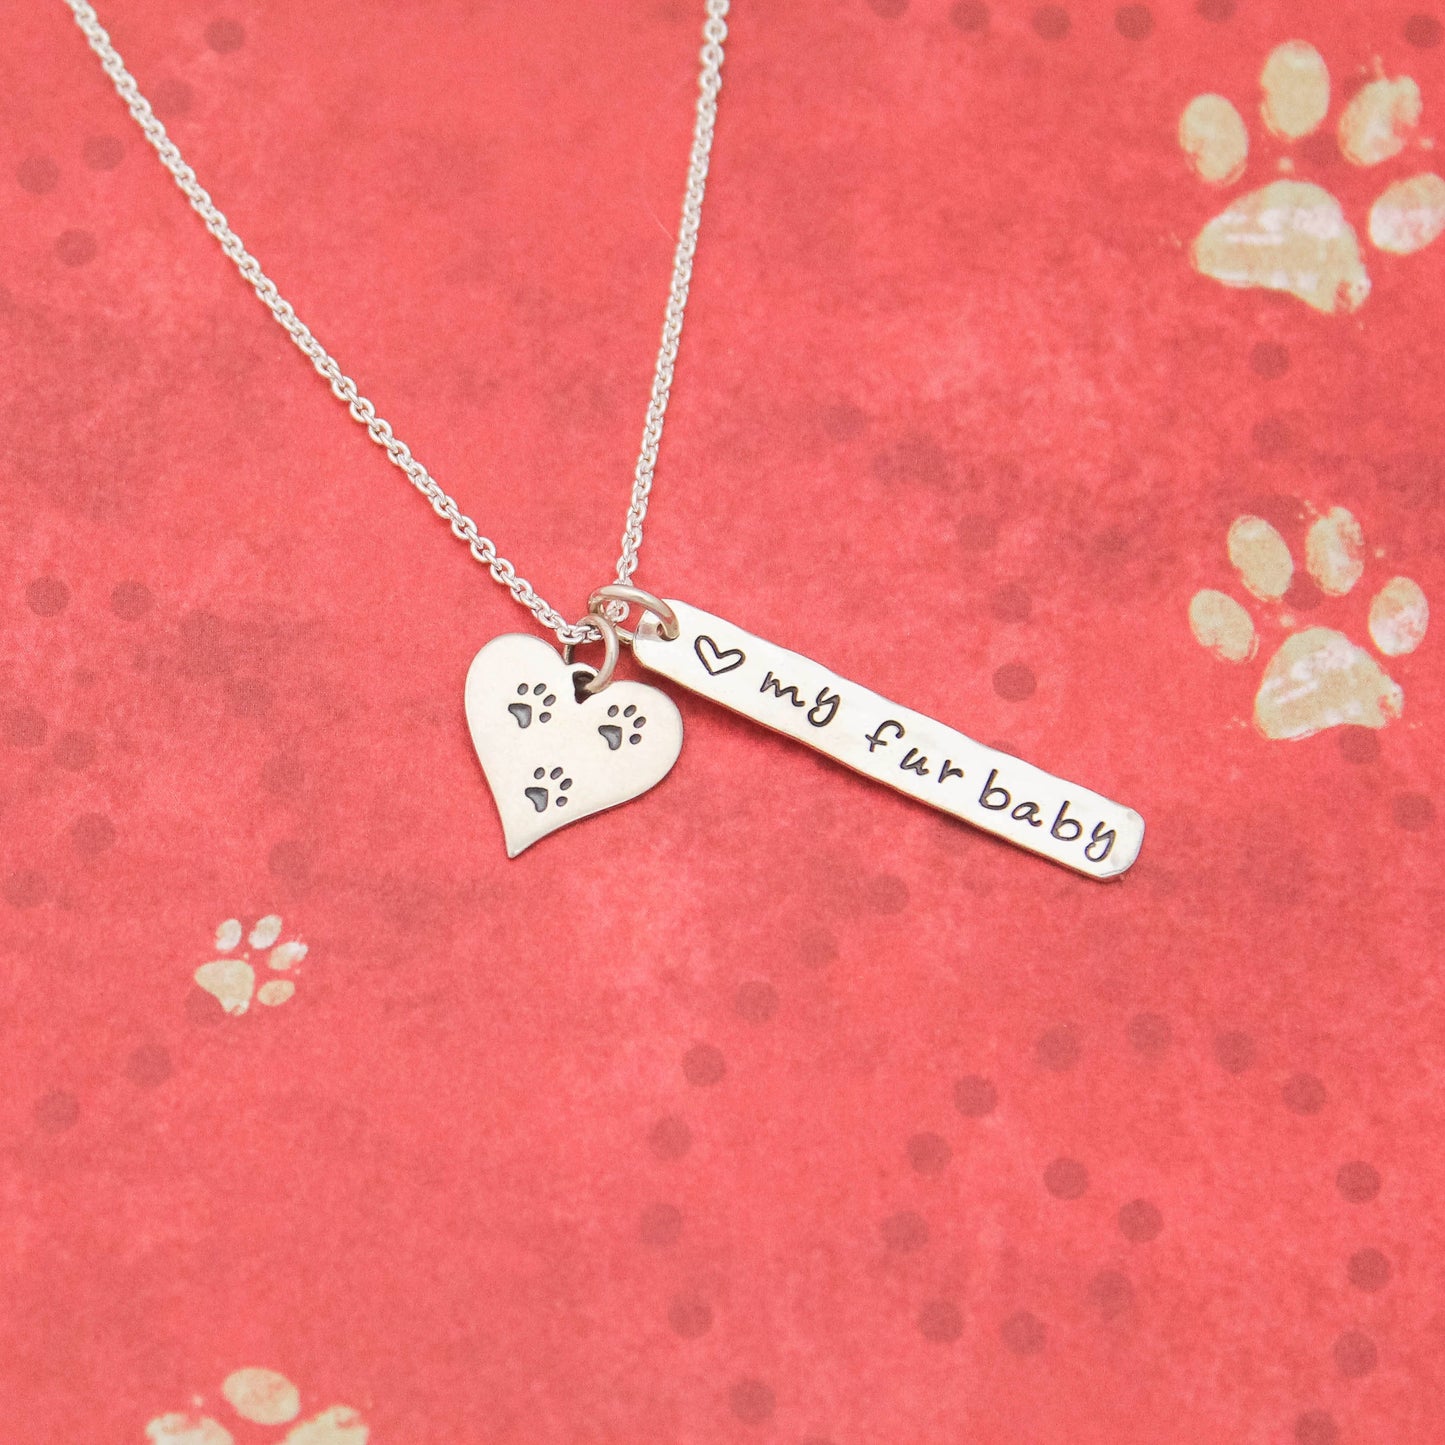 LOVE my Furbaby Necklace, Sterling Silver Dog Necklace, Cute Dog Lover Gift, New Pet Gift, Dog Paw Jewelry, Paw Print Necklace, Hand Stamped